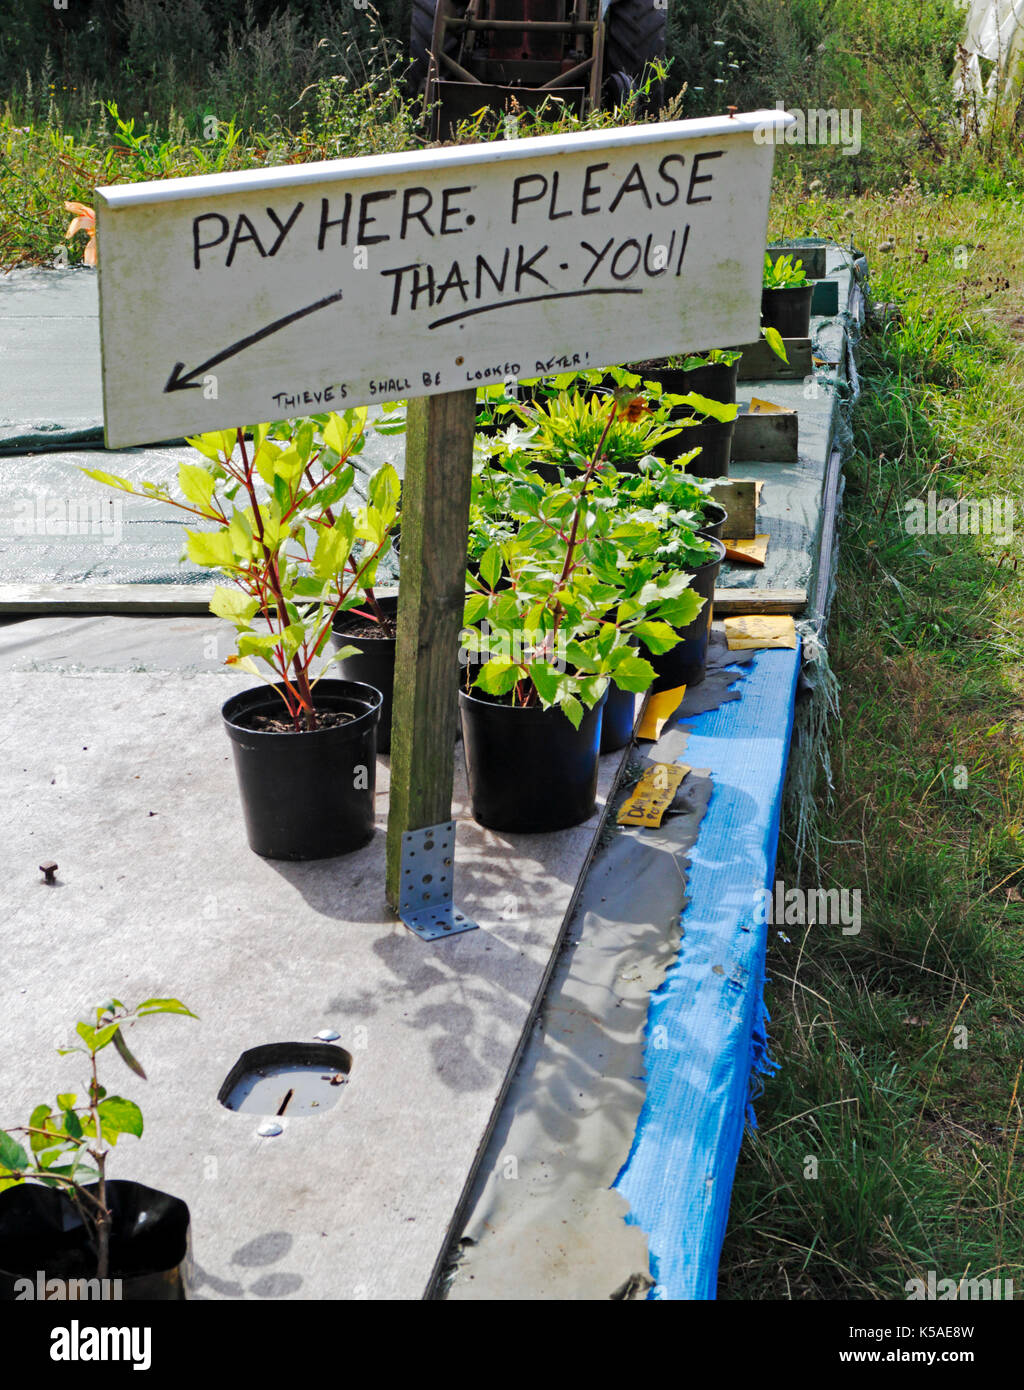 A Pay Here sign and honesty box on a roadside plant sales stall in the Norfolk countryside. Stock Photo